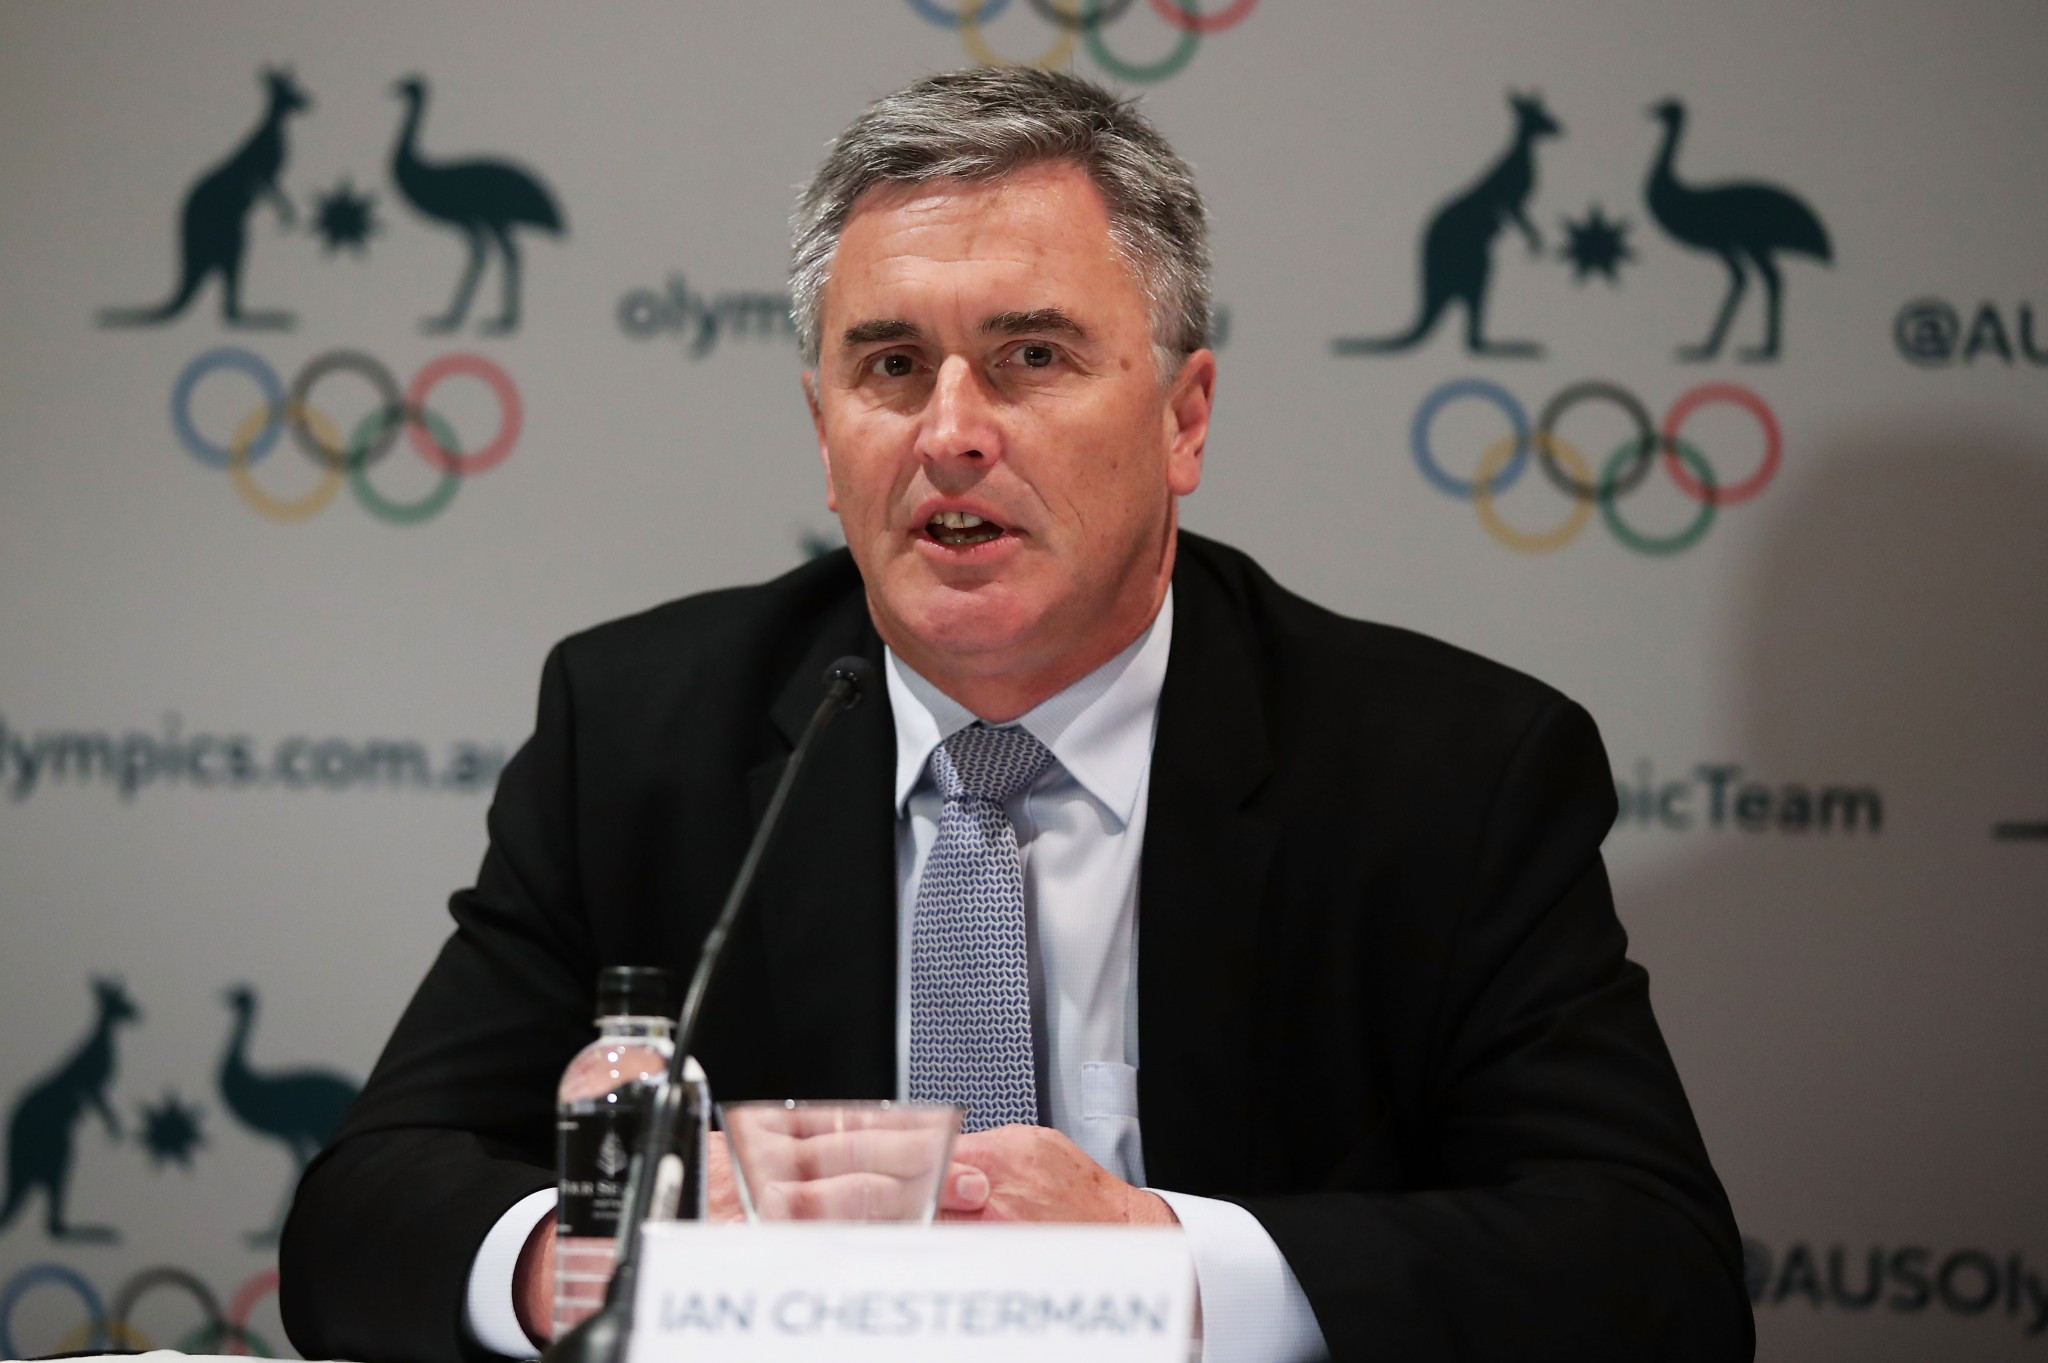 Chesterman appointed Australian Chef de Mission for Tokyo 2020